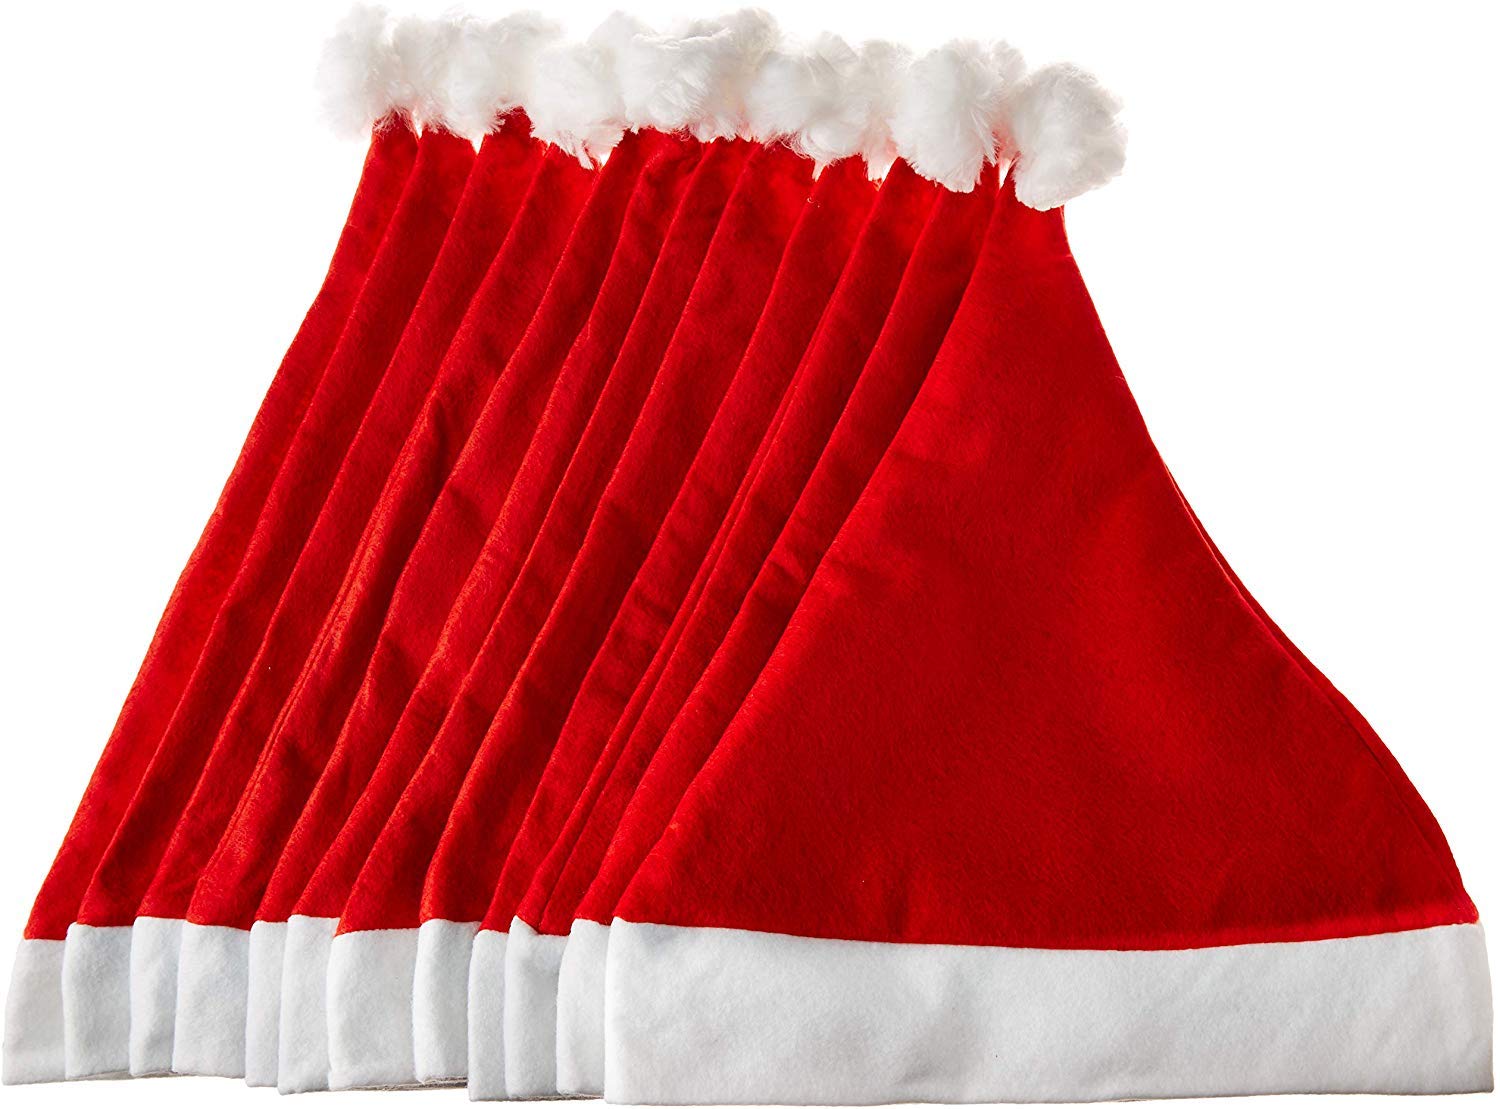 eCraftIndia Red and White Merry Christmas Hats, Santa Claus Caps for kids and Adults - Free Size XMAS Caps, Santa Claus Hats for Christmas, New Year, Festive Holiday Party (Set of 3) 4